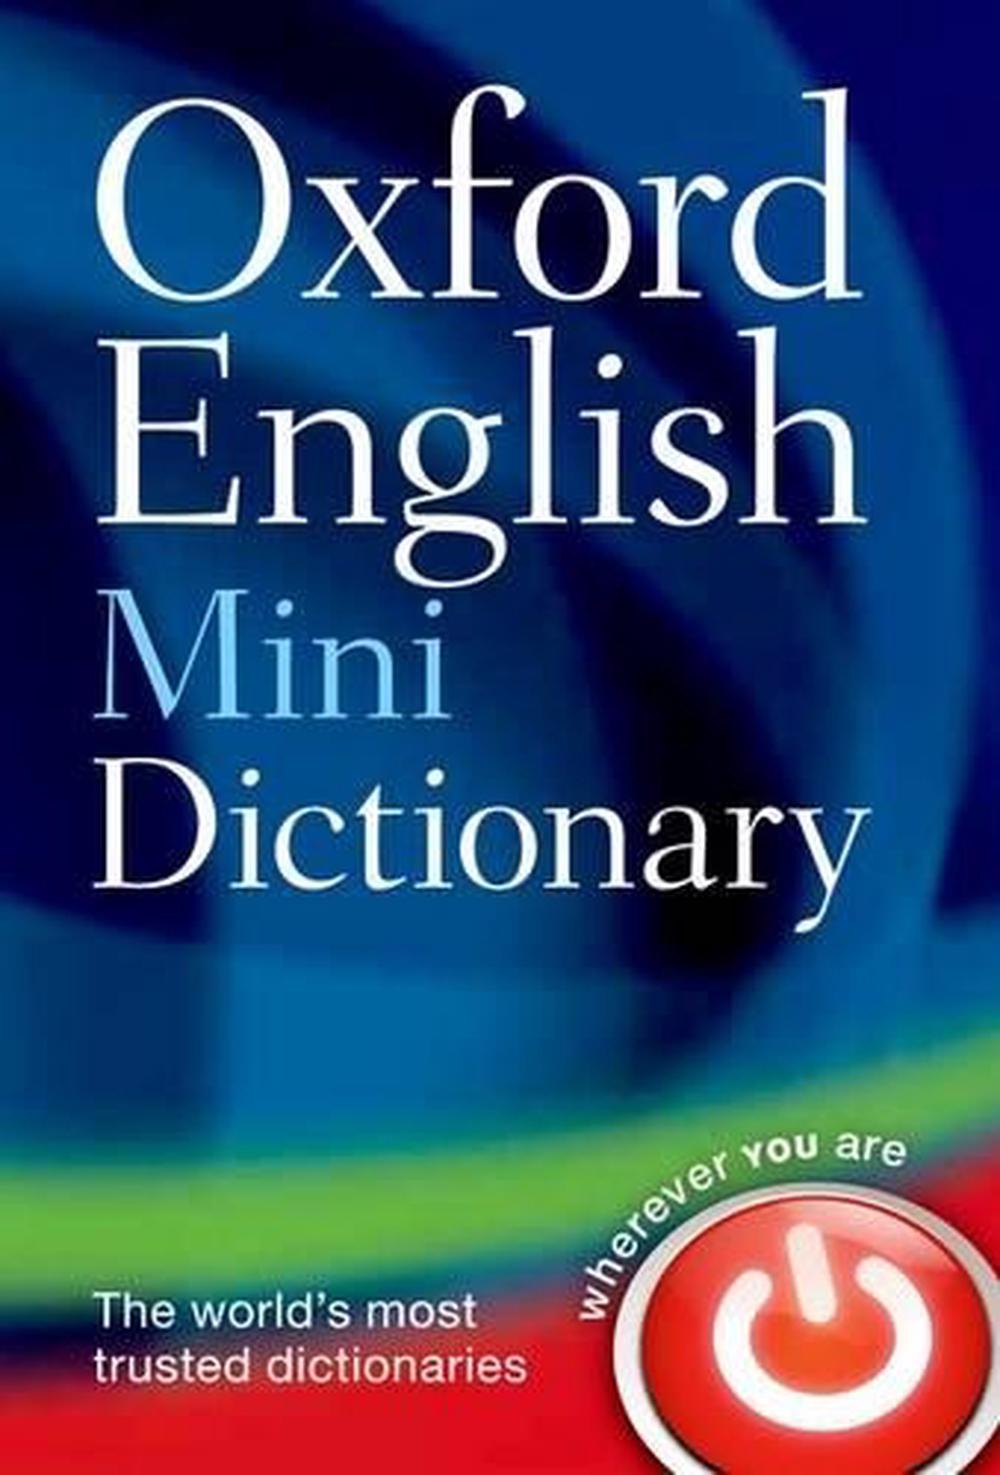 Oxford English Mini Dictionary by Oxford Dictionaries, 9780199640966